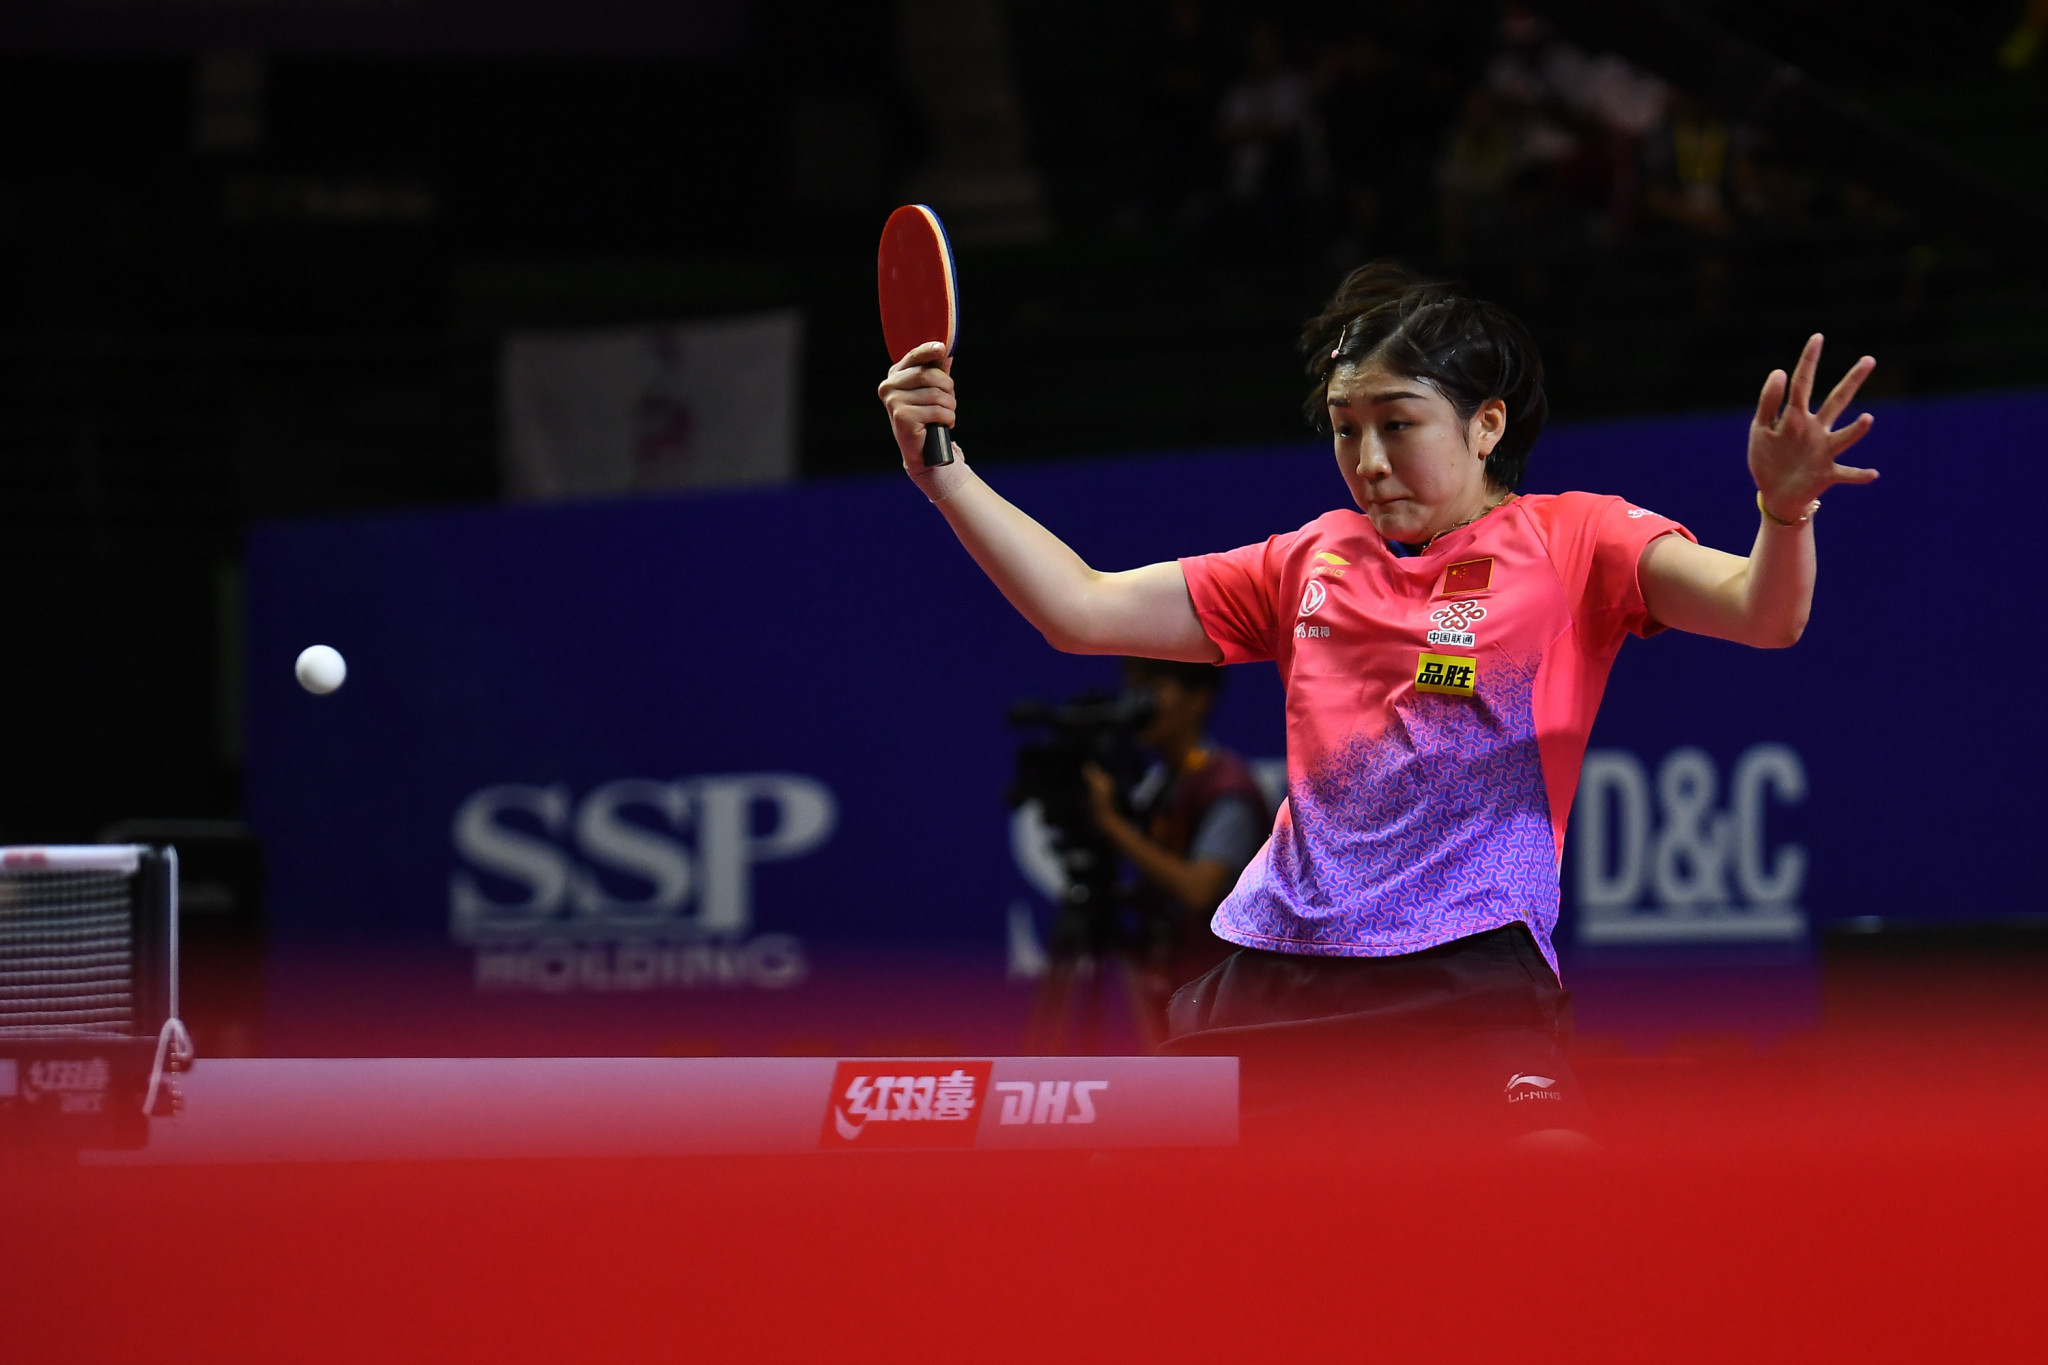 Chen out for record-equalling victory at ITTF German Open